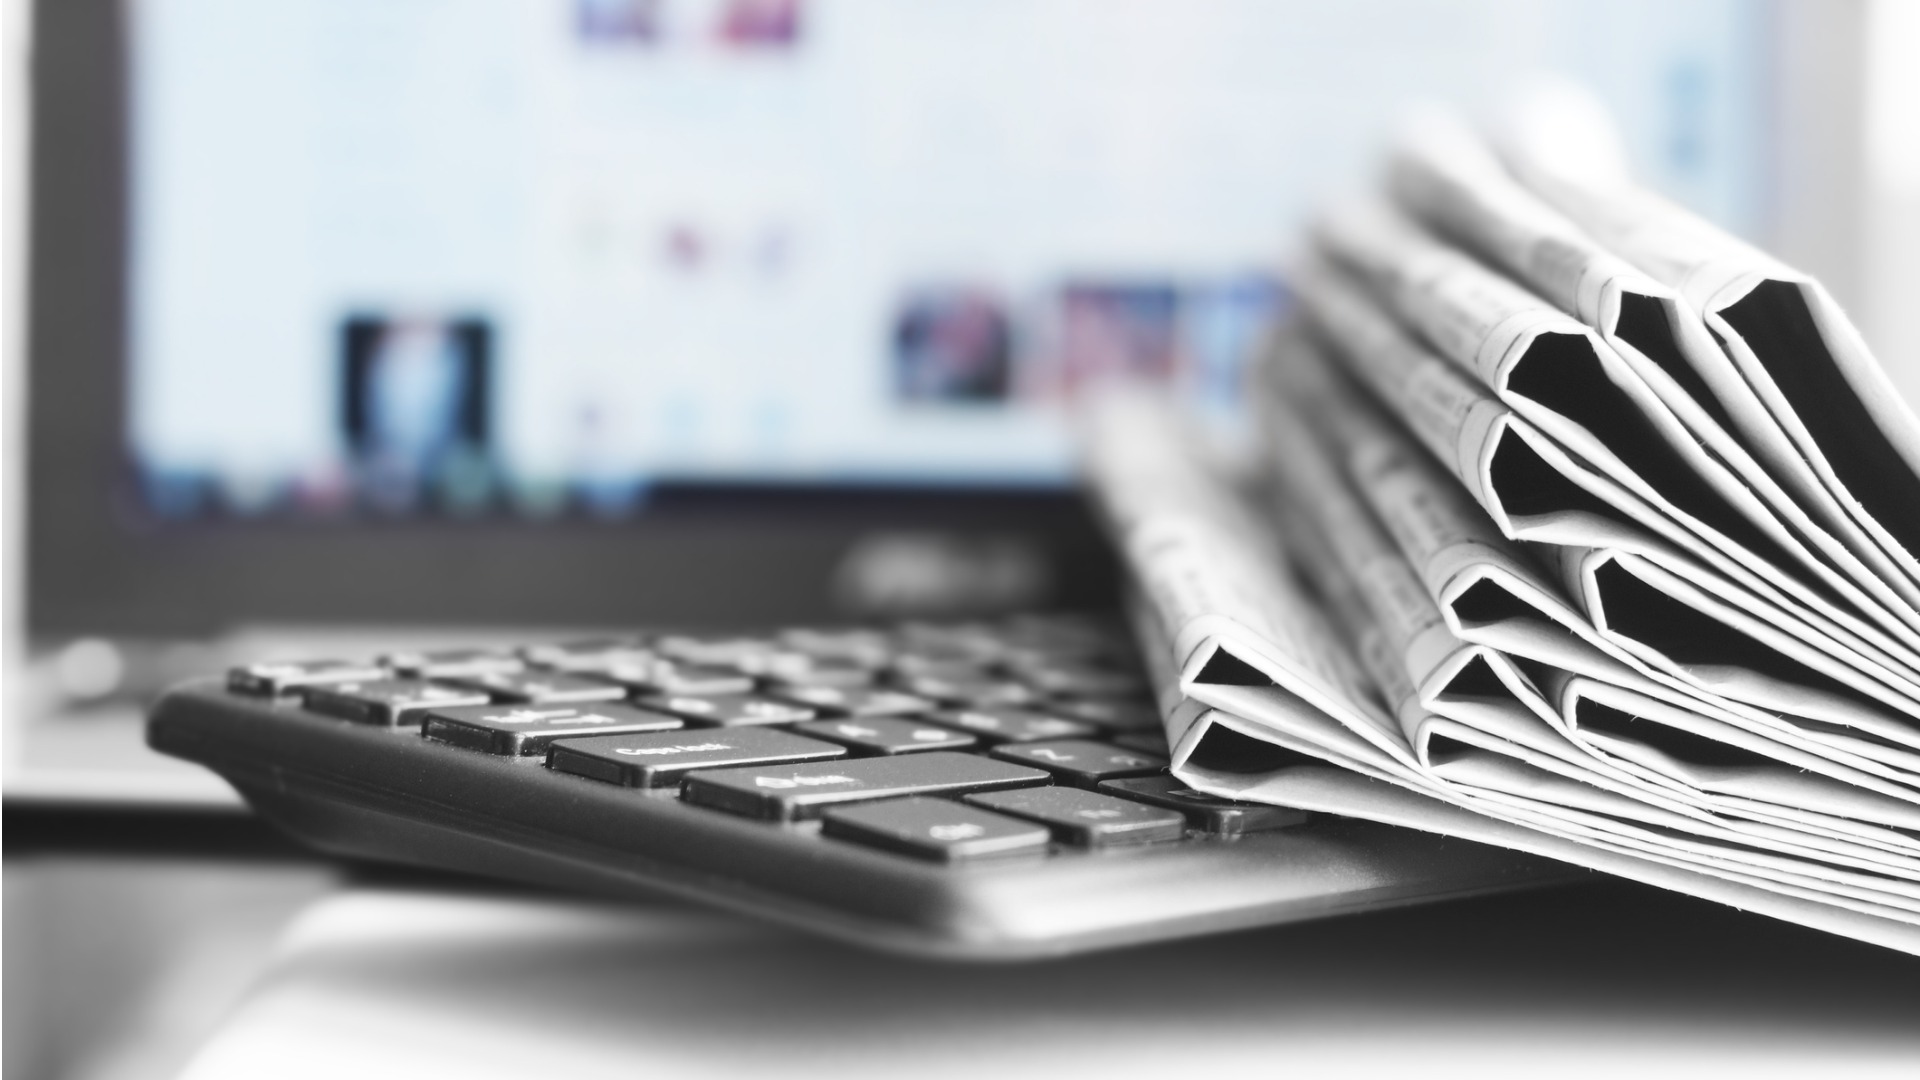 newspapers-and-laptop-istock